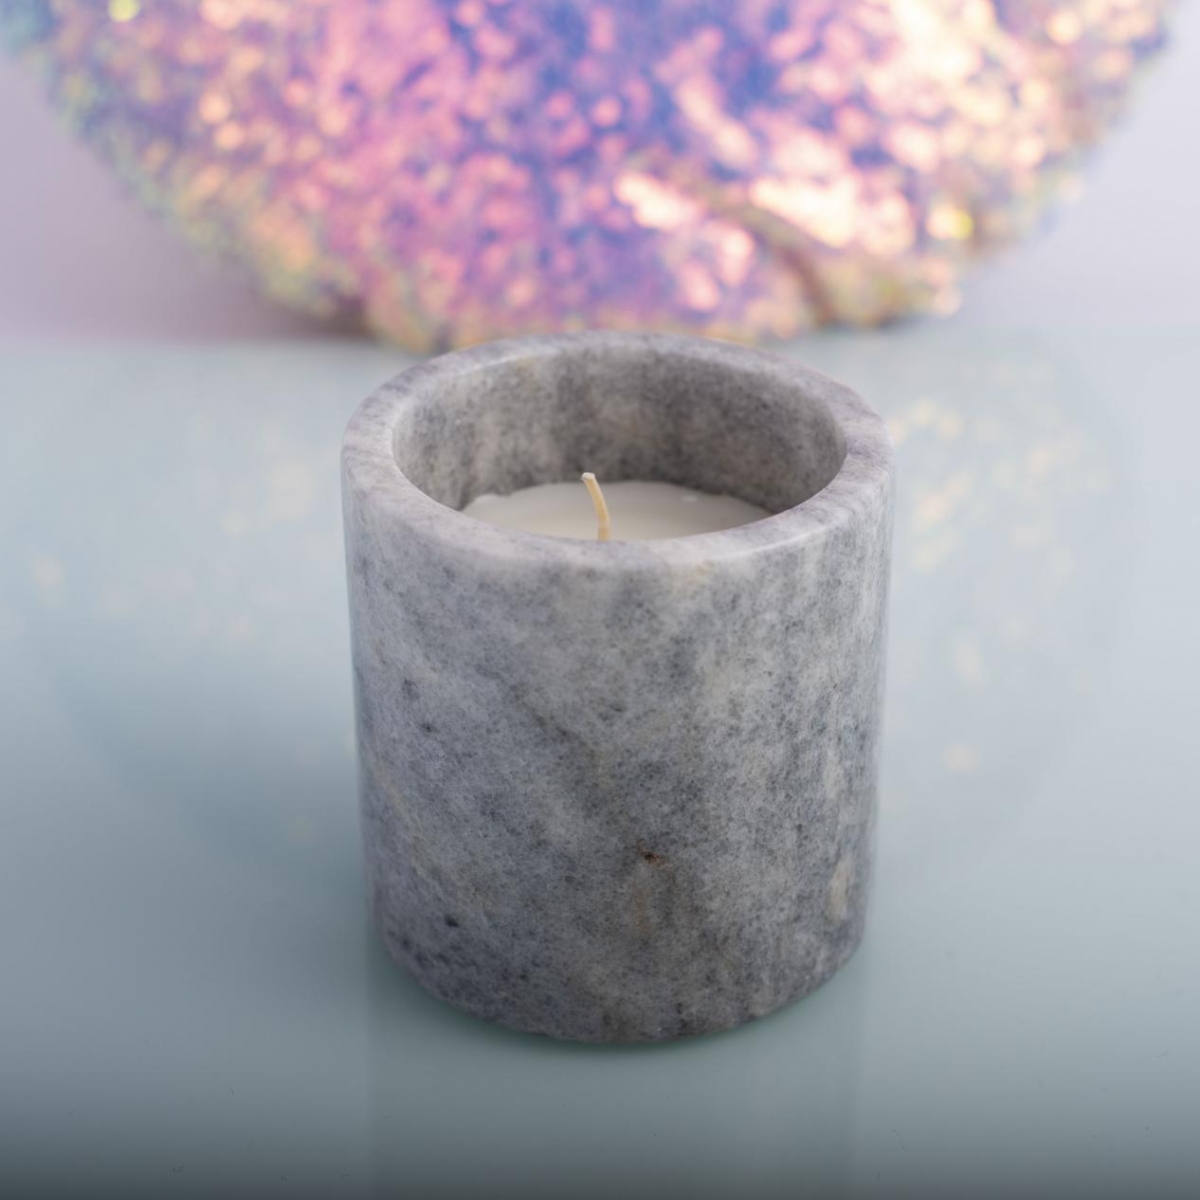 Luxury Scented Candles : Gray Candles ,Marble Jar , Aromatherapy Candles, China Factory , Best Price-HOWCANDLE-Candles,Scented Candles,Aromatherapy Candles,Soy Candles,Vegan Candles,Jar Candles,Pillar Candles,Candle Gift Sets,Essential Oils,Reed Diffuser,Candle Holder,